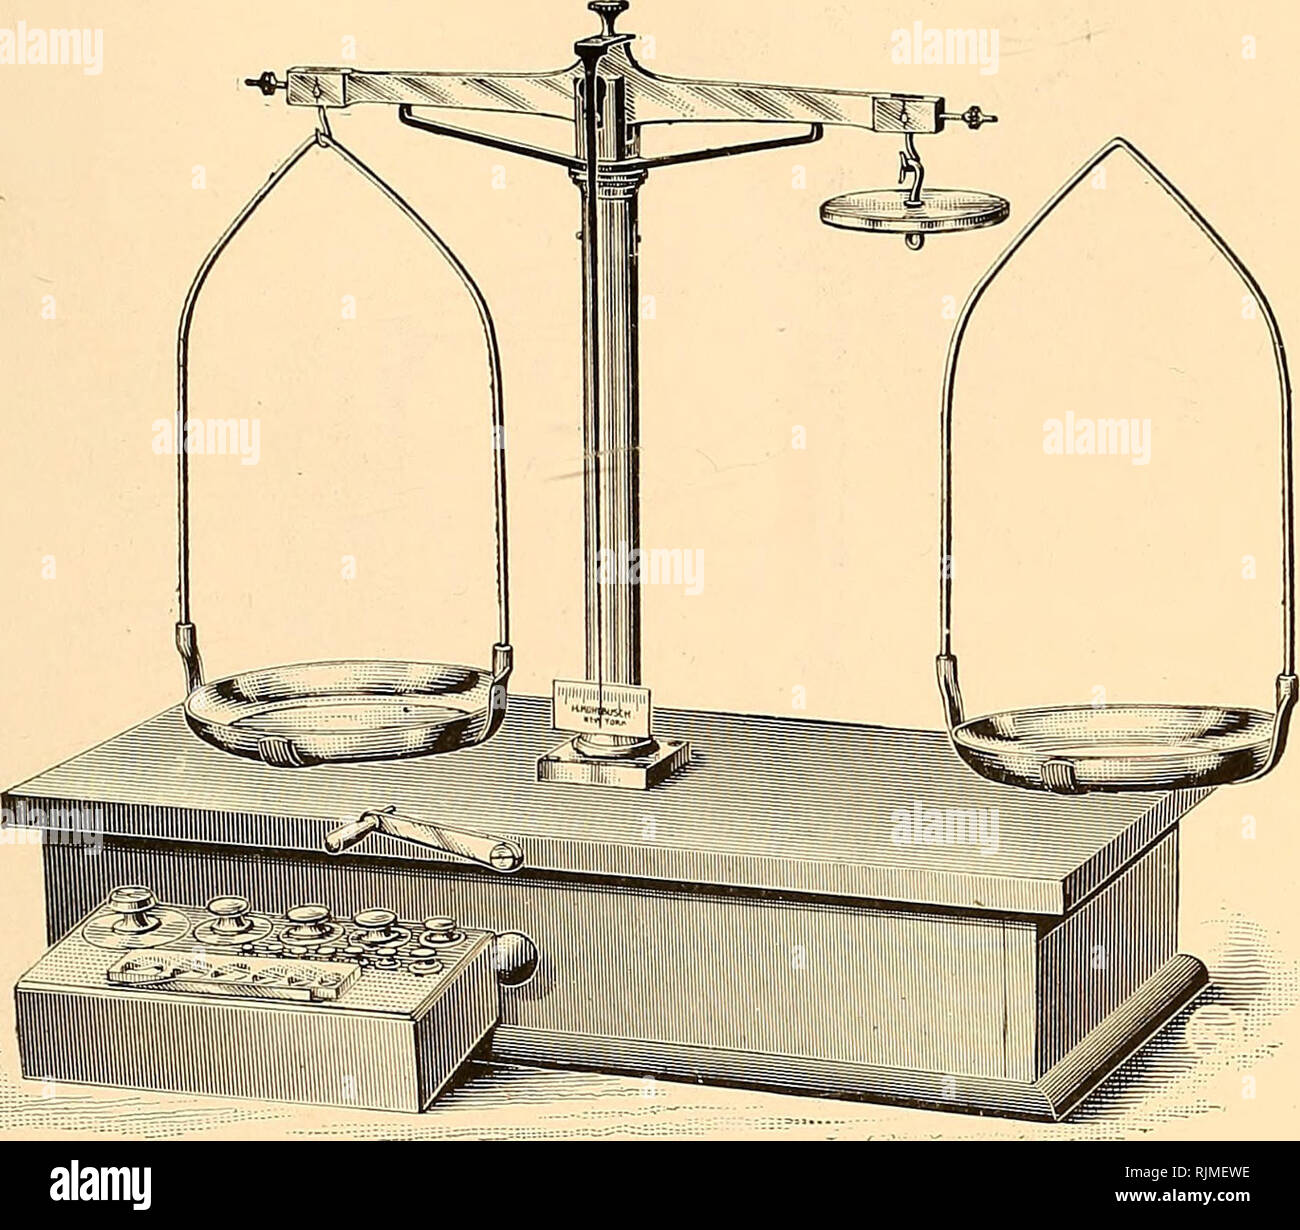 . Bacteriological apparatus : pathological, biochemical. Scientific apparatus and instruments; Bacteriology; Chemical industry. ®i)j&gt; Will (Earpnratiou, &amp;atti?BUt, N.. 10485 10485 Balance—Specific Gravity, Hydrostatic. 'Especially designed for school and commercial use; capacity, 1 ctgrm to 1 kilo; length of beam, 250 mm; diameter of pans, 135 mm; mounted on base with drawer and supplied complete with set of brass weights, 1 ctgrm to 500 grms; scale may be used for usual weighing by substituting the scale bow for the counterpoised pan Each 20.00. Please note that these images are extrac Stock Photo